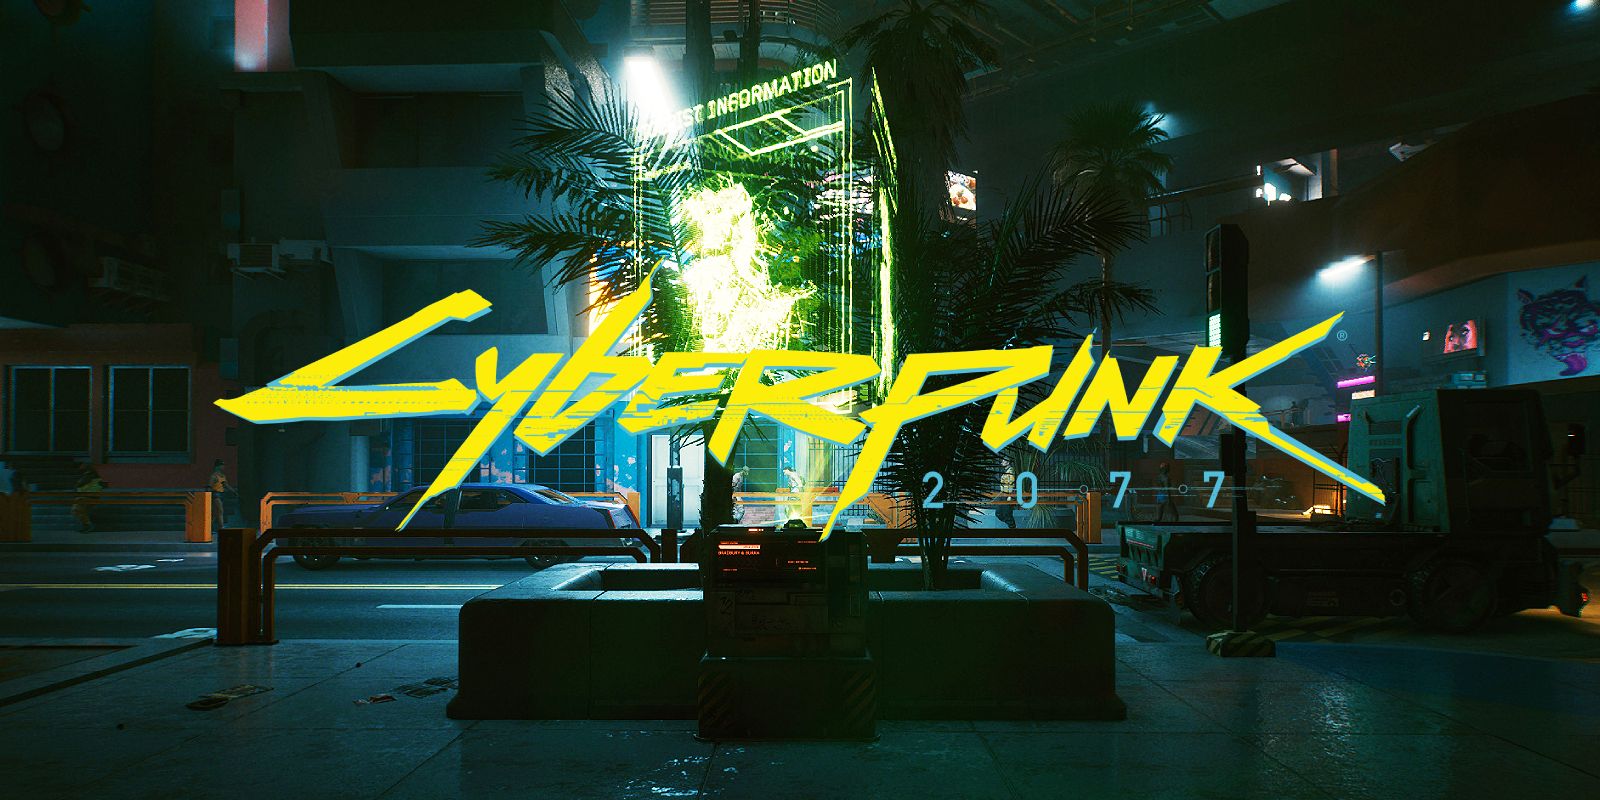 Everything Cyberpunk 2077 Gets Wrong About Subways, According To Experts